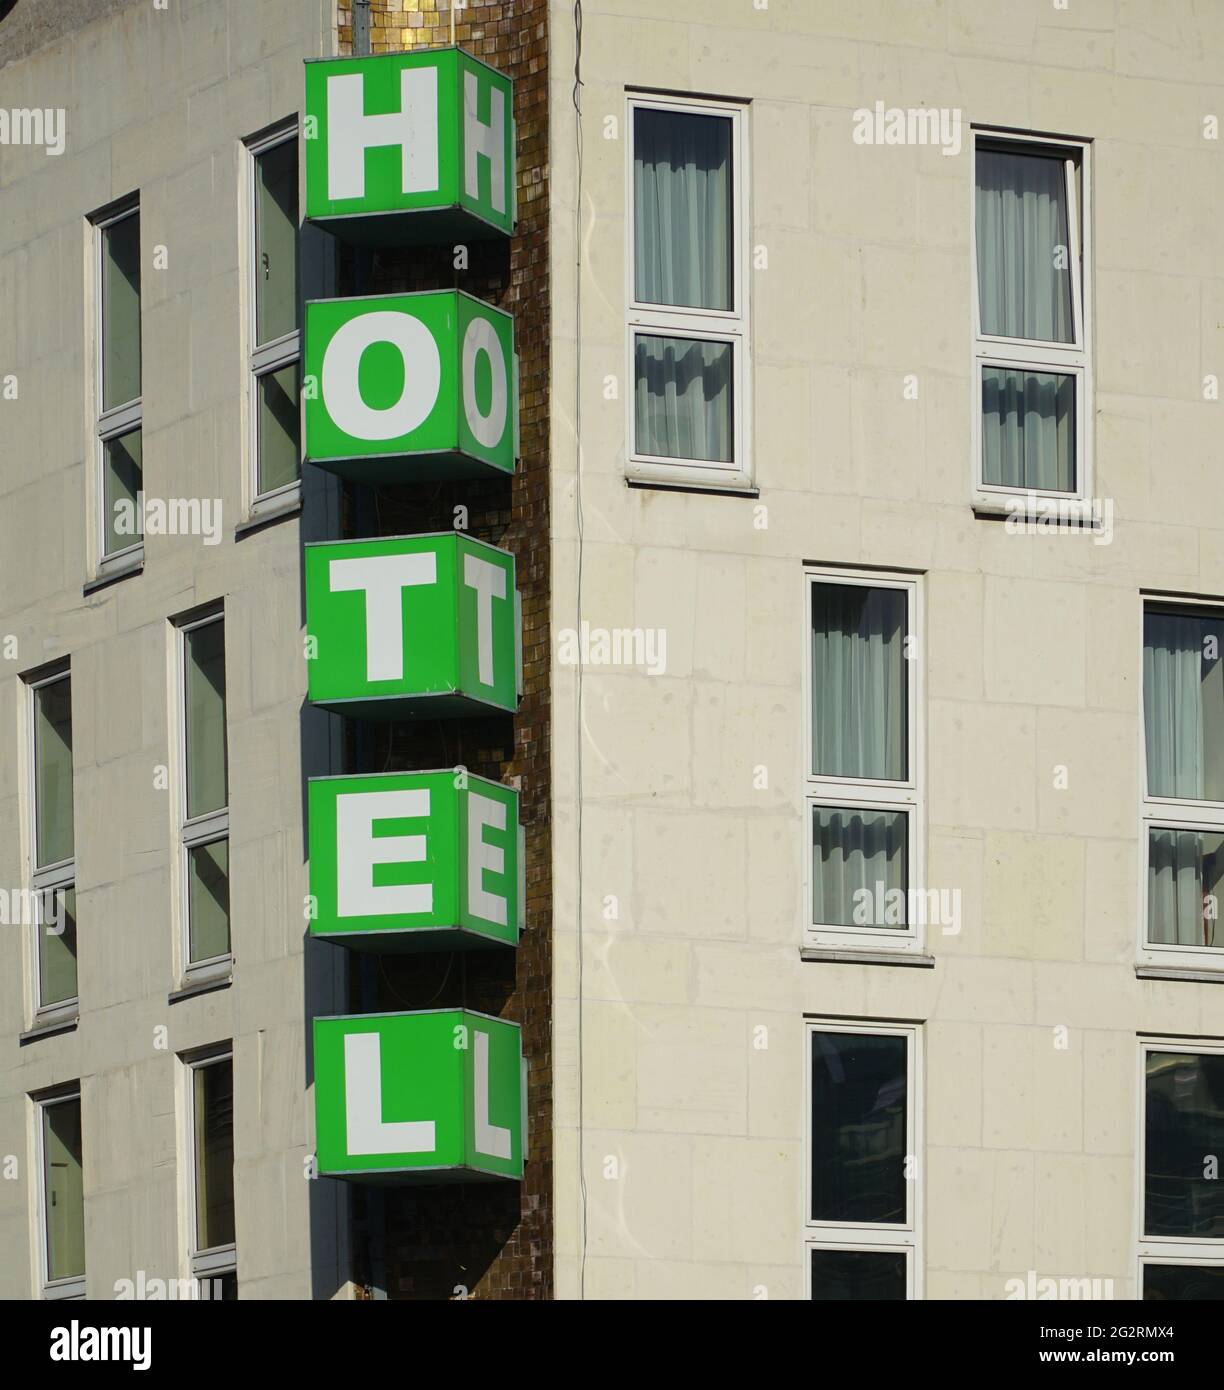 Vertical Hotel signboard over the entrance to the building. Vertical green hotel sign mounted on beige facade of hotel. White letters on green cubes. Stock Photo